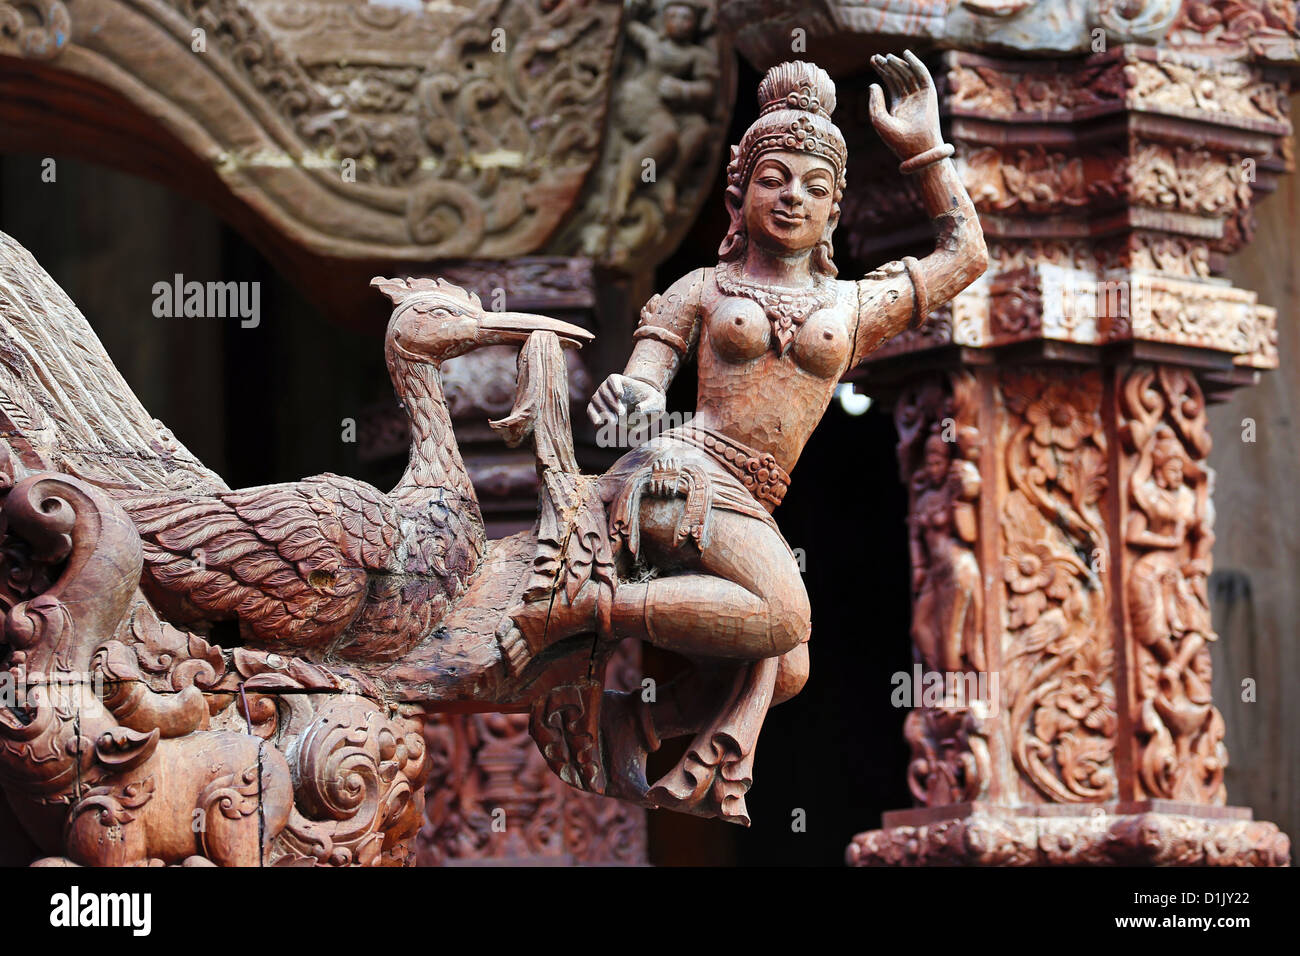 Wooden carving on the Sanctuary of Truth Temple, Prasat Sut Ja-Tum, Pattaya, Thailand showing a wood statue Stock Photo